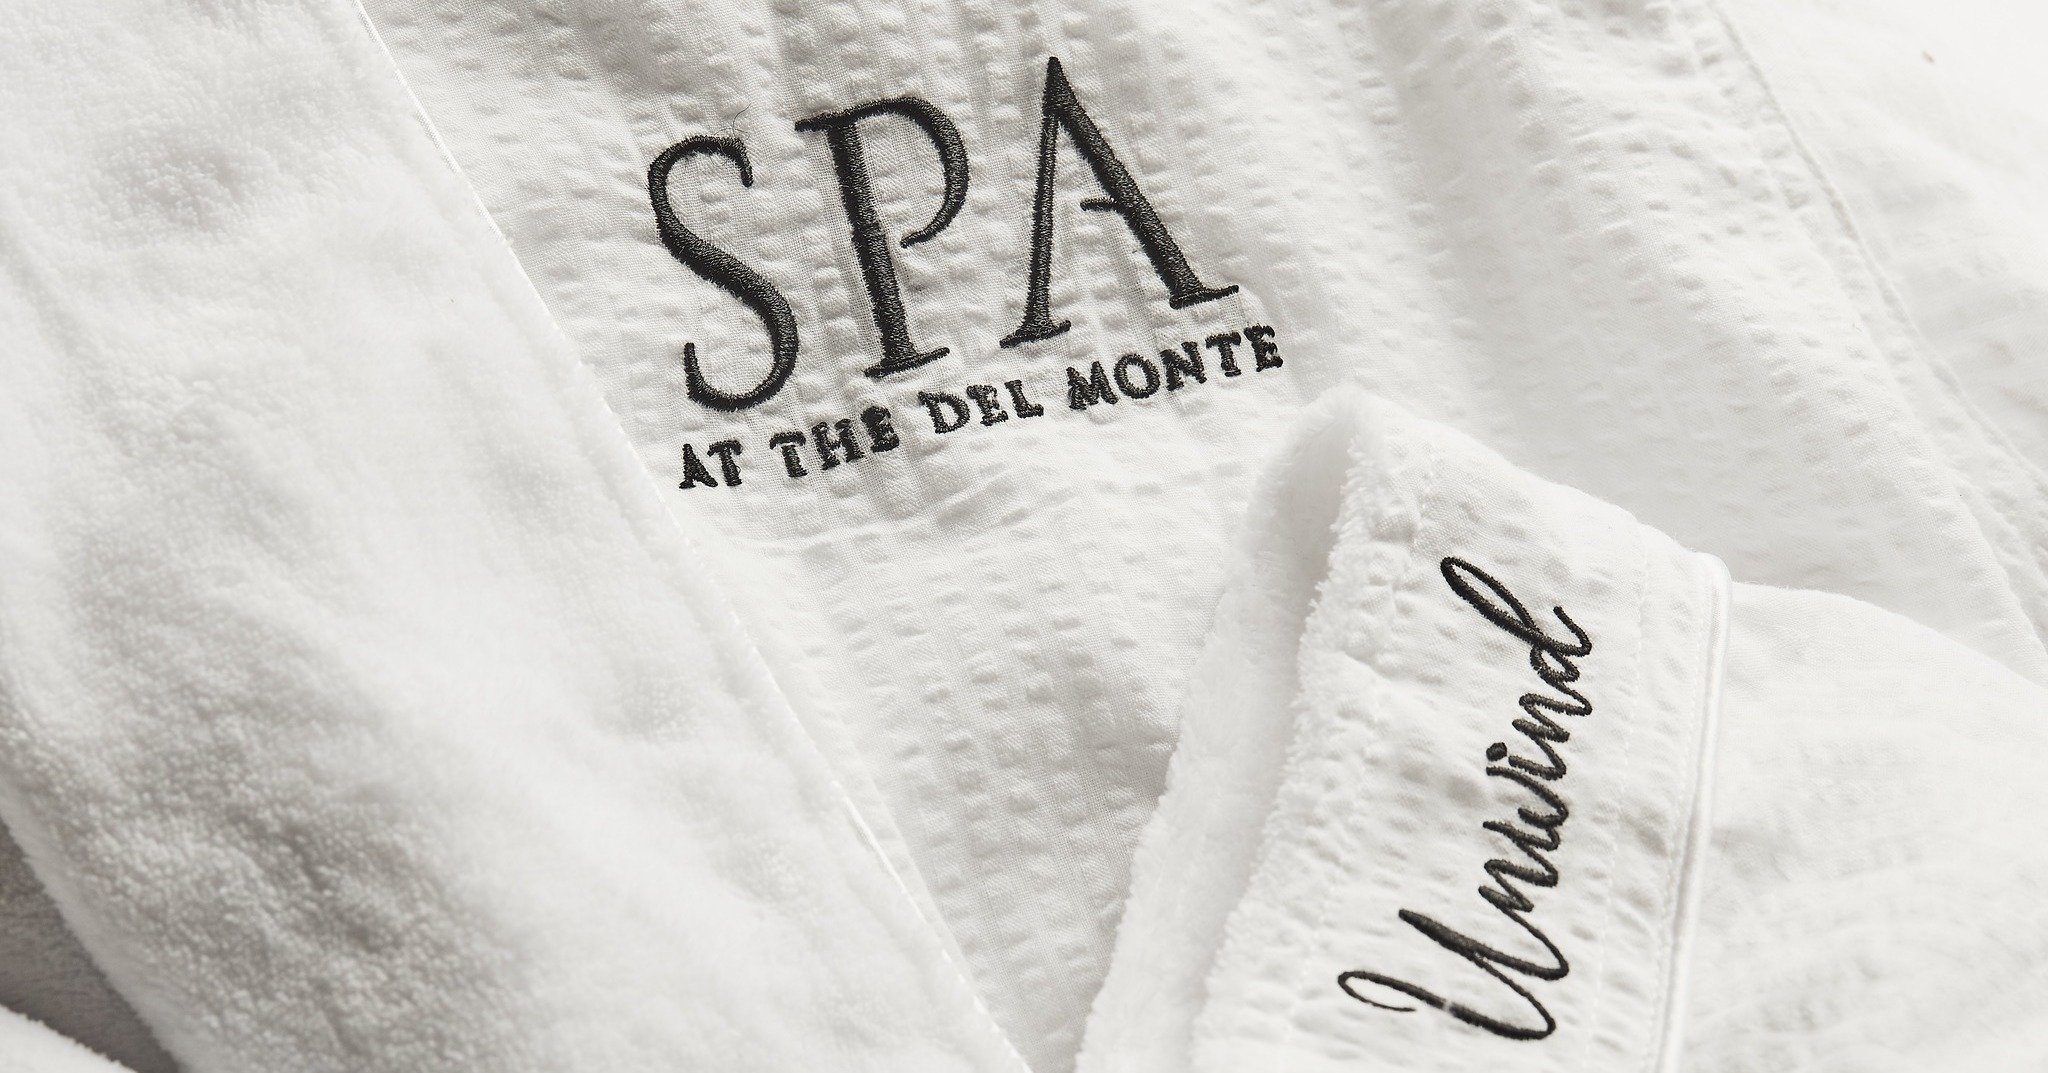 You can bring the Spa home with you with your very own Spa at the Del Monte robe!
.
.
.
Visit our boutique and we'll help you get your very own piece of the Spa 🥰
.
#delmontespa #skinhealth #spalife #spalife #spa #dayspa #pittsford #skincare #shoplo